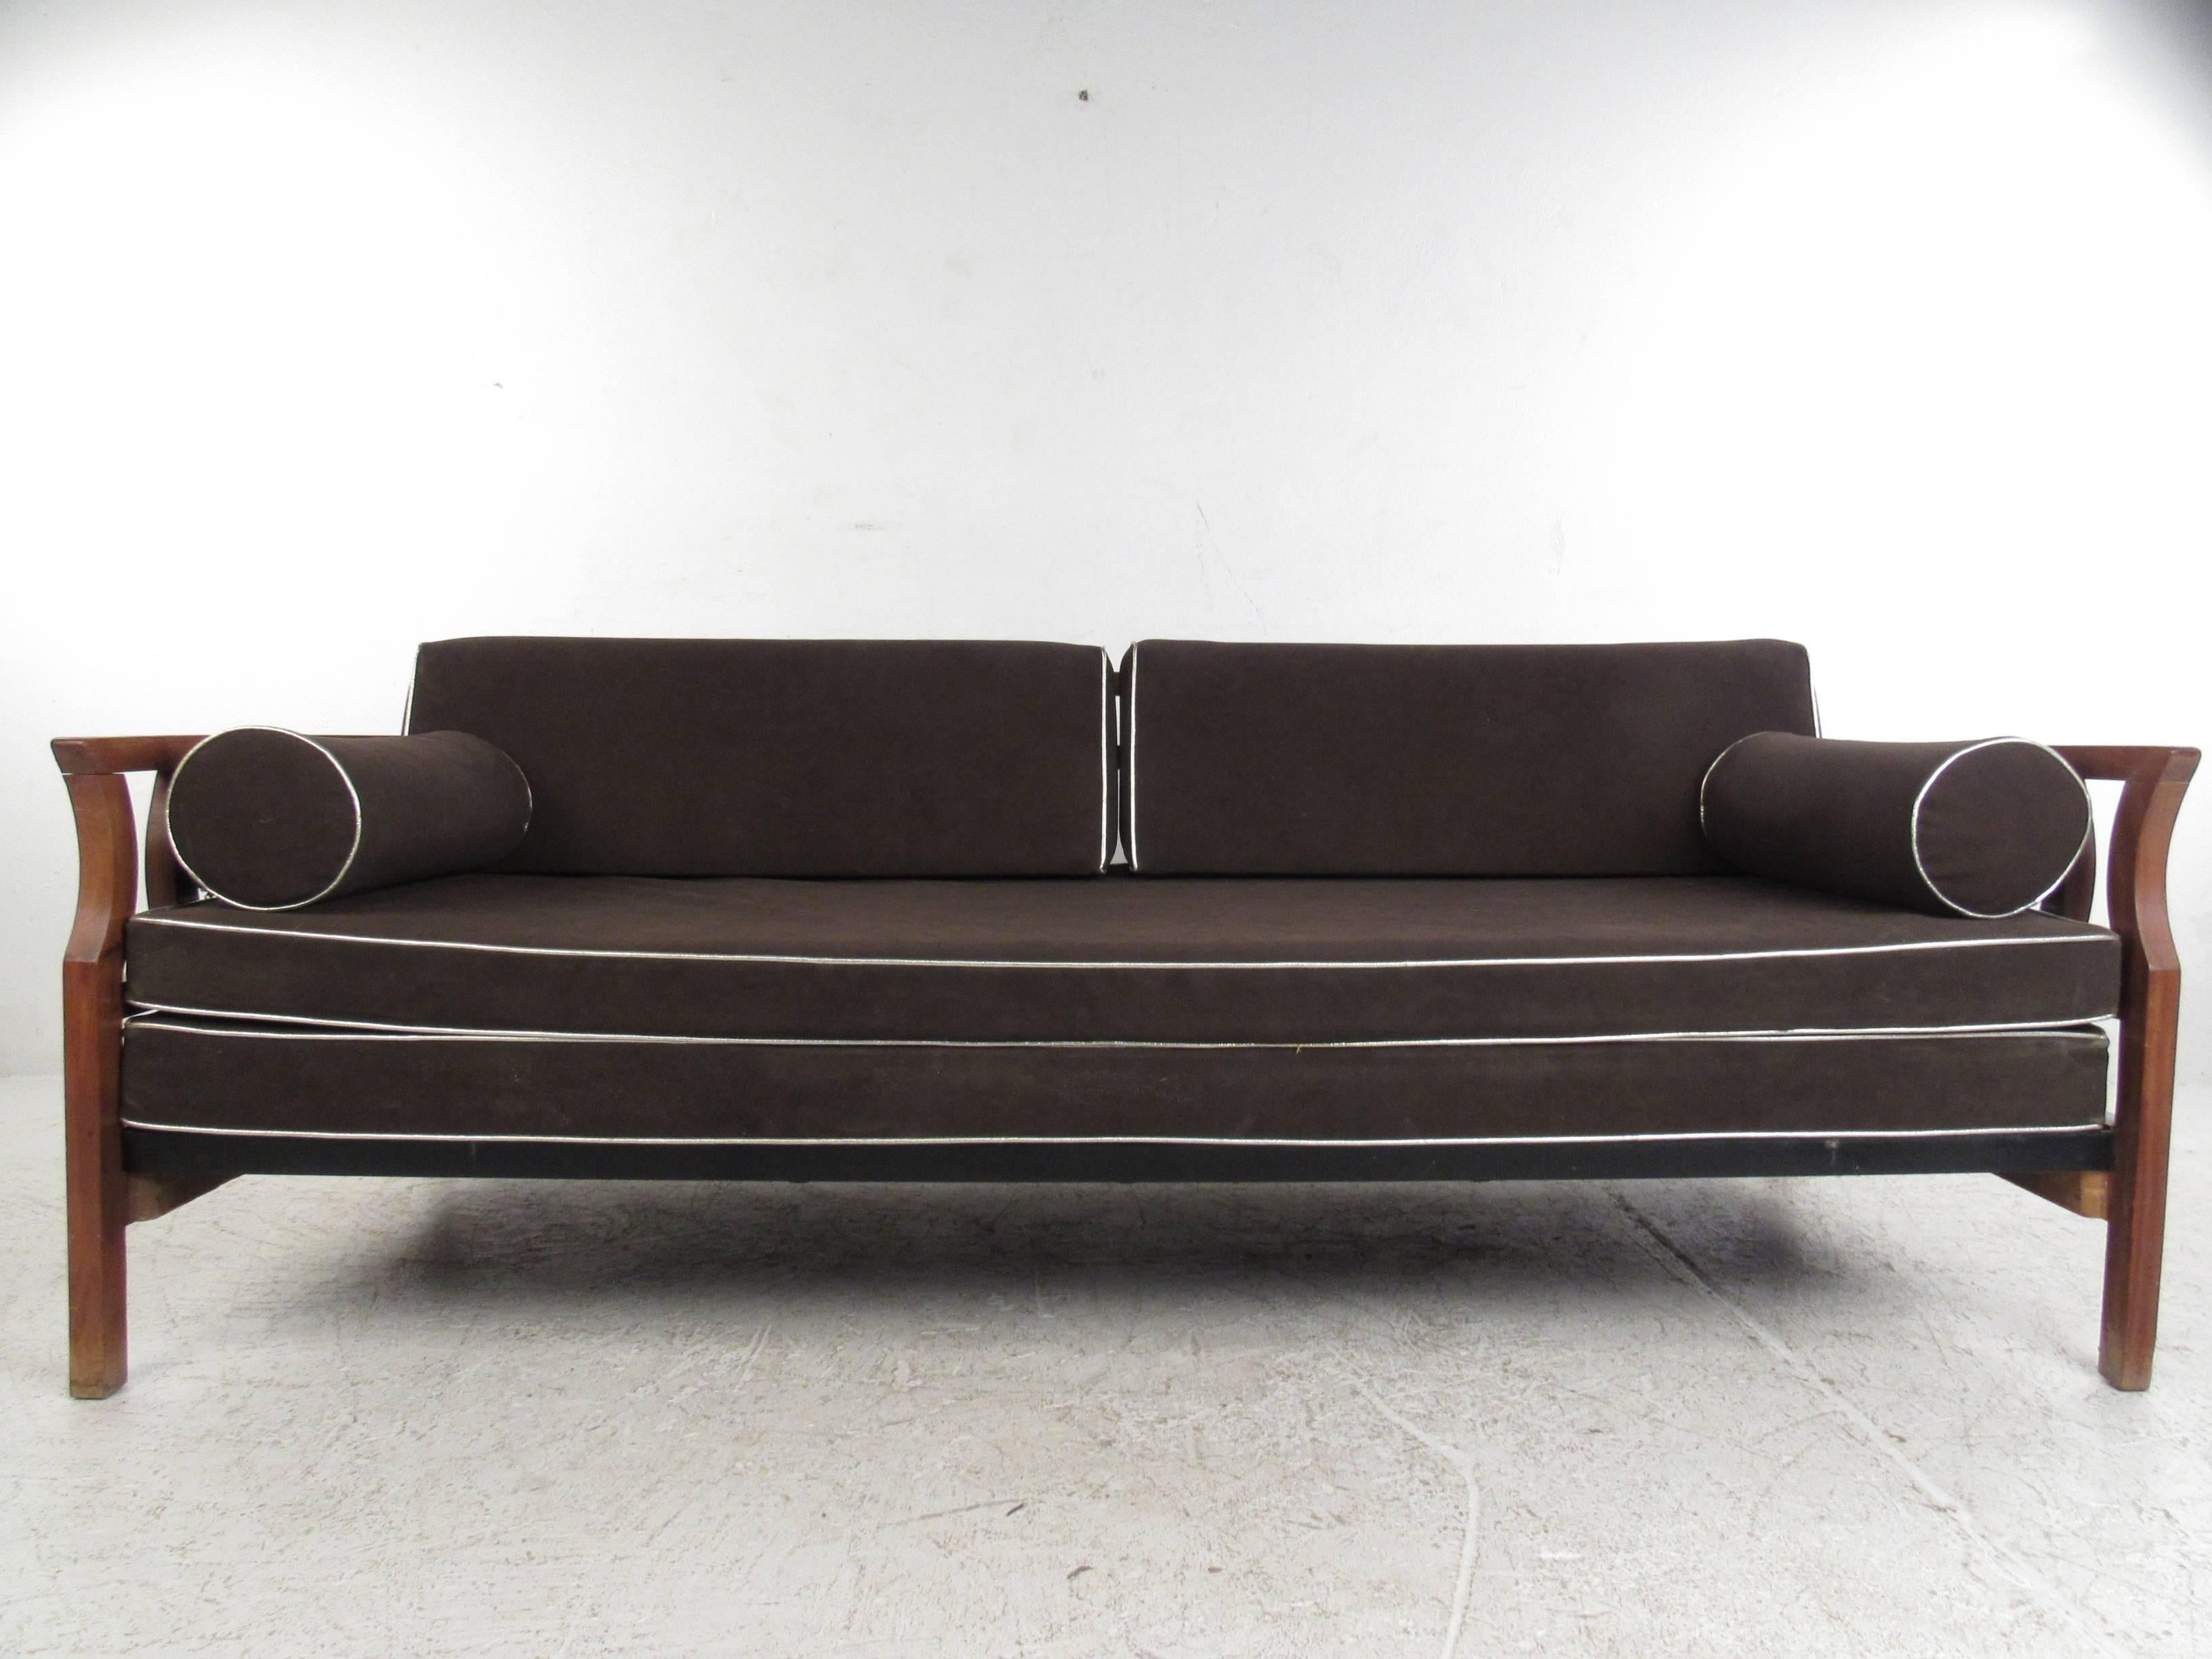 This unique double cushion sofa features sturdy construction and unique 1960s design. Sculptural walnut frame features double oval cutaway arms, with a sturdy iron spring bottom. Angled seat back and cylindrical pillows add to it's vintage charm.